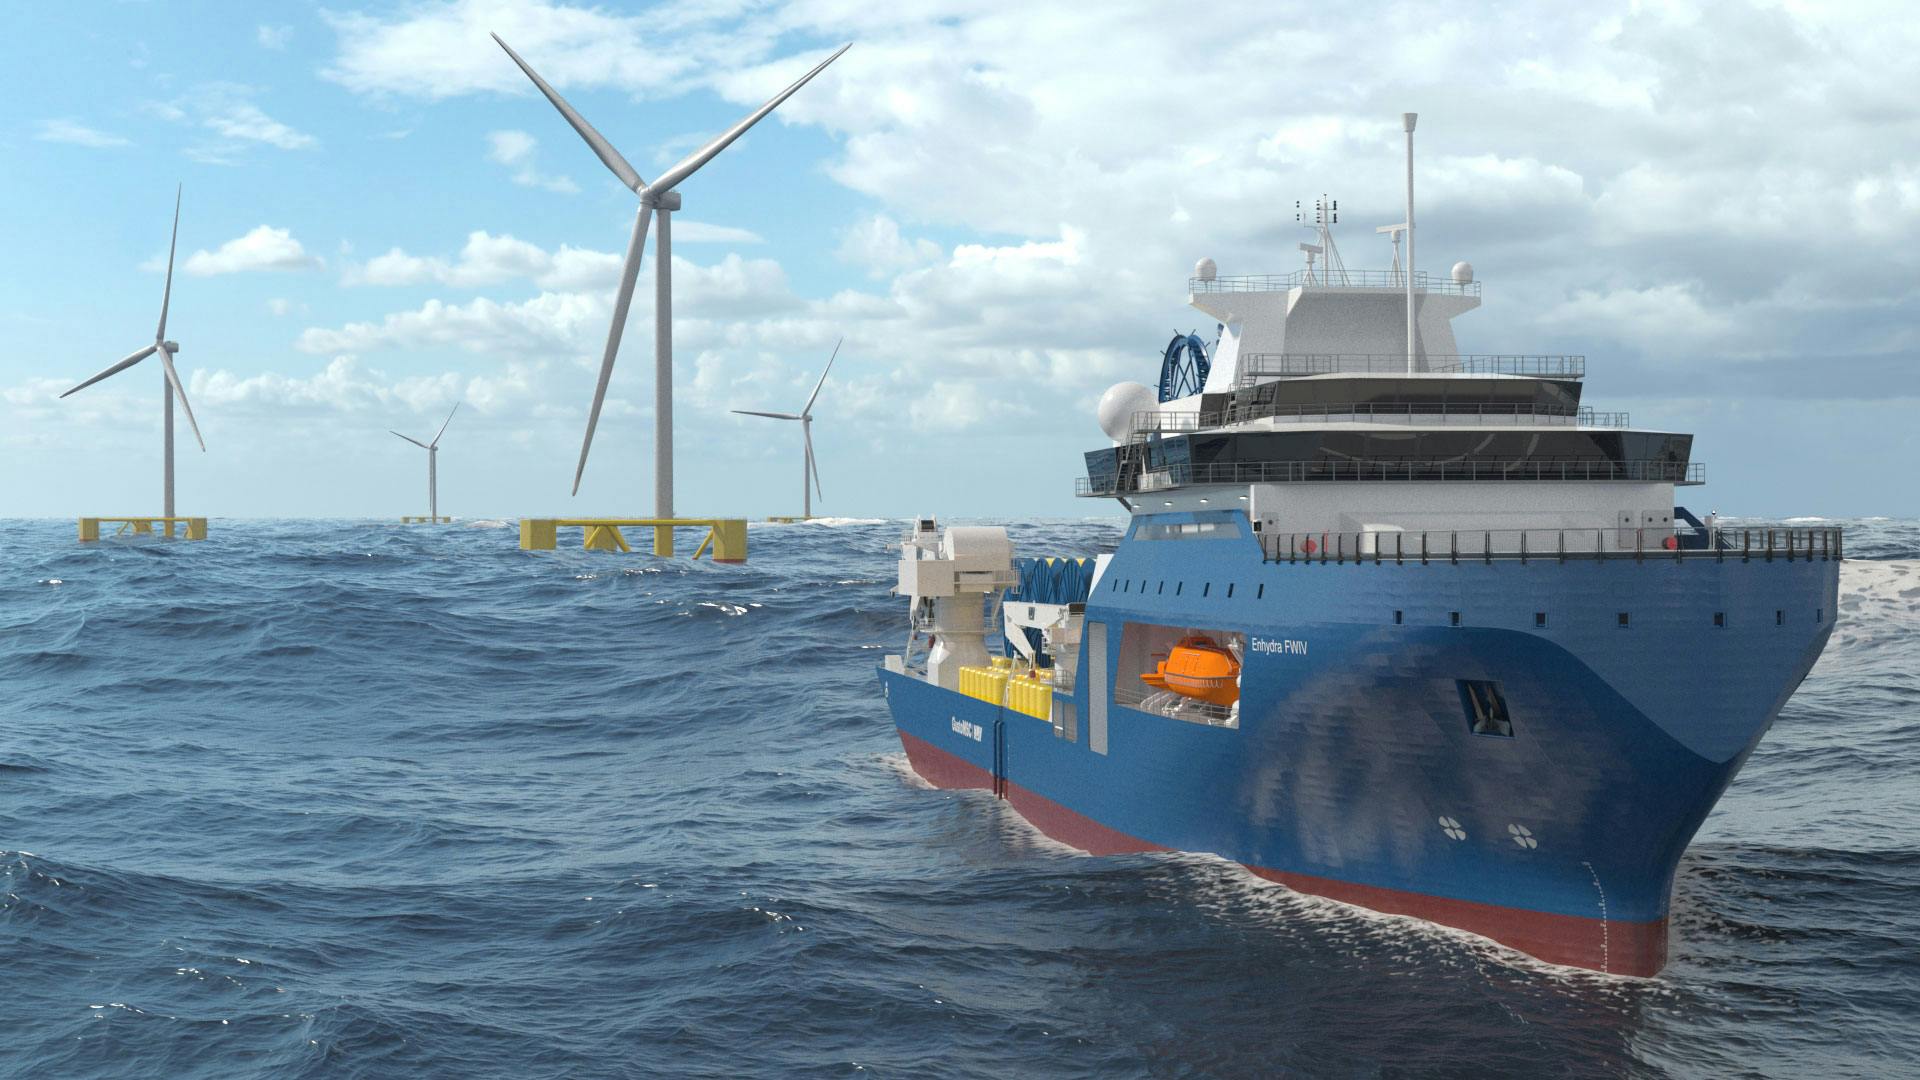 Render of an Enhydra FWIV floating wind installation vessel concept at sea, with wind turbines in the background